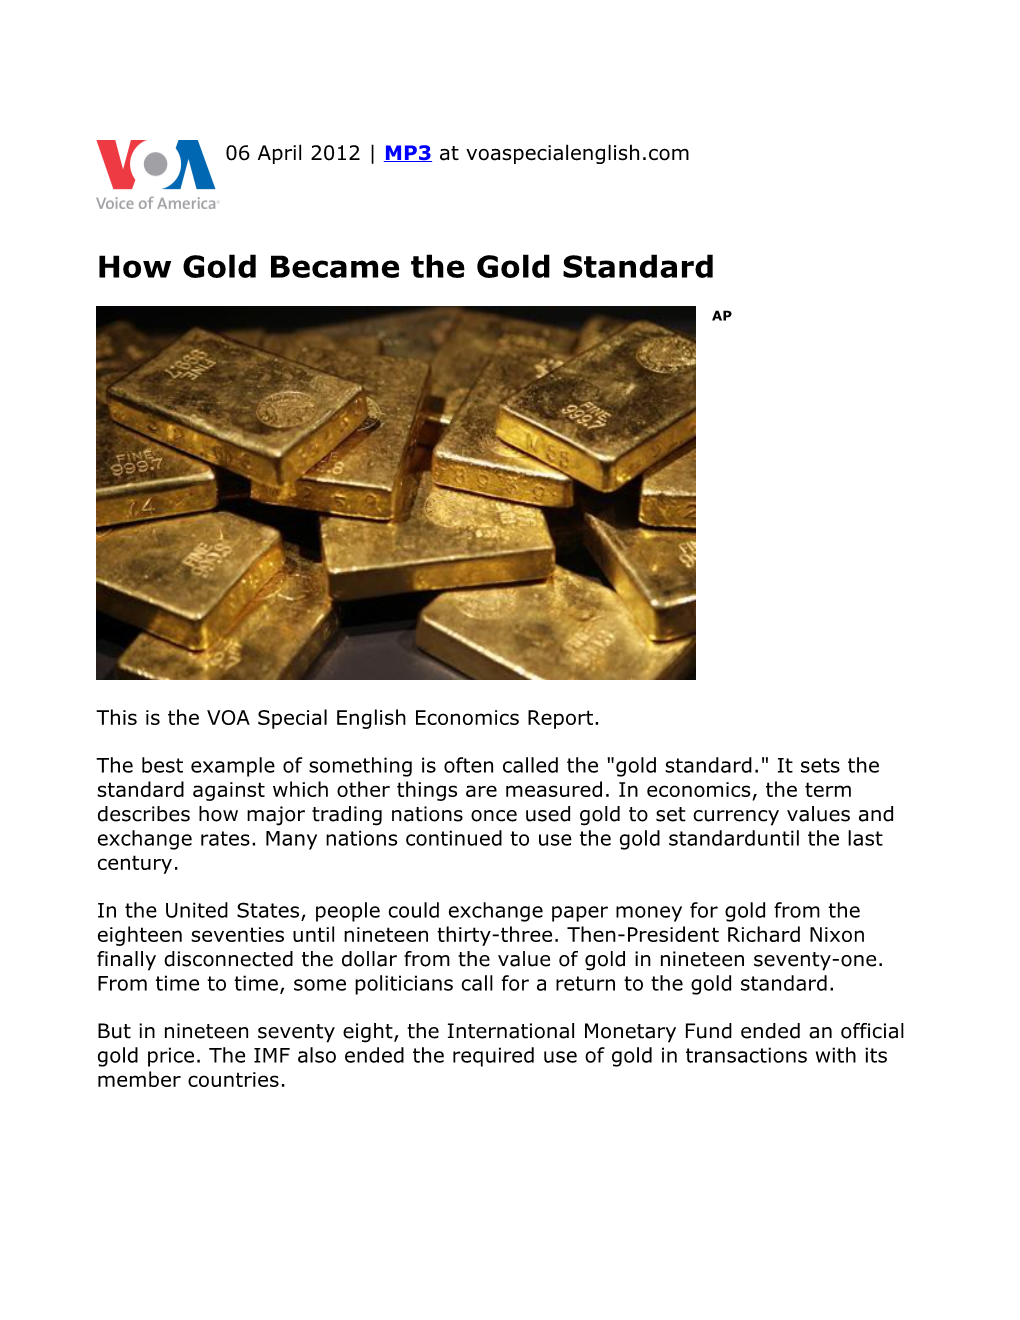 How Gold Became the Gold Standard